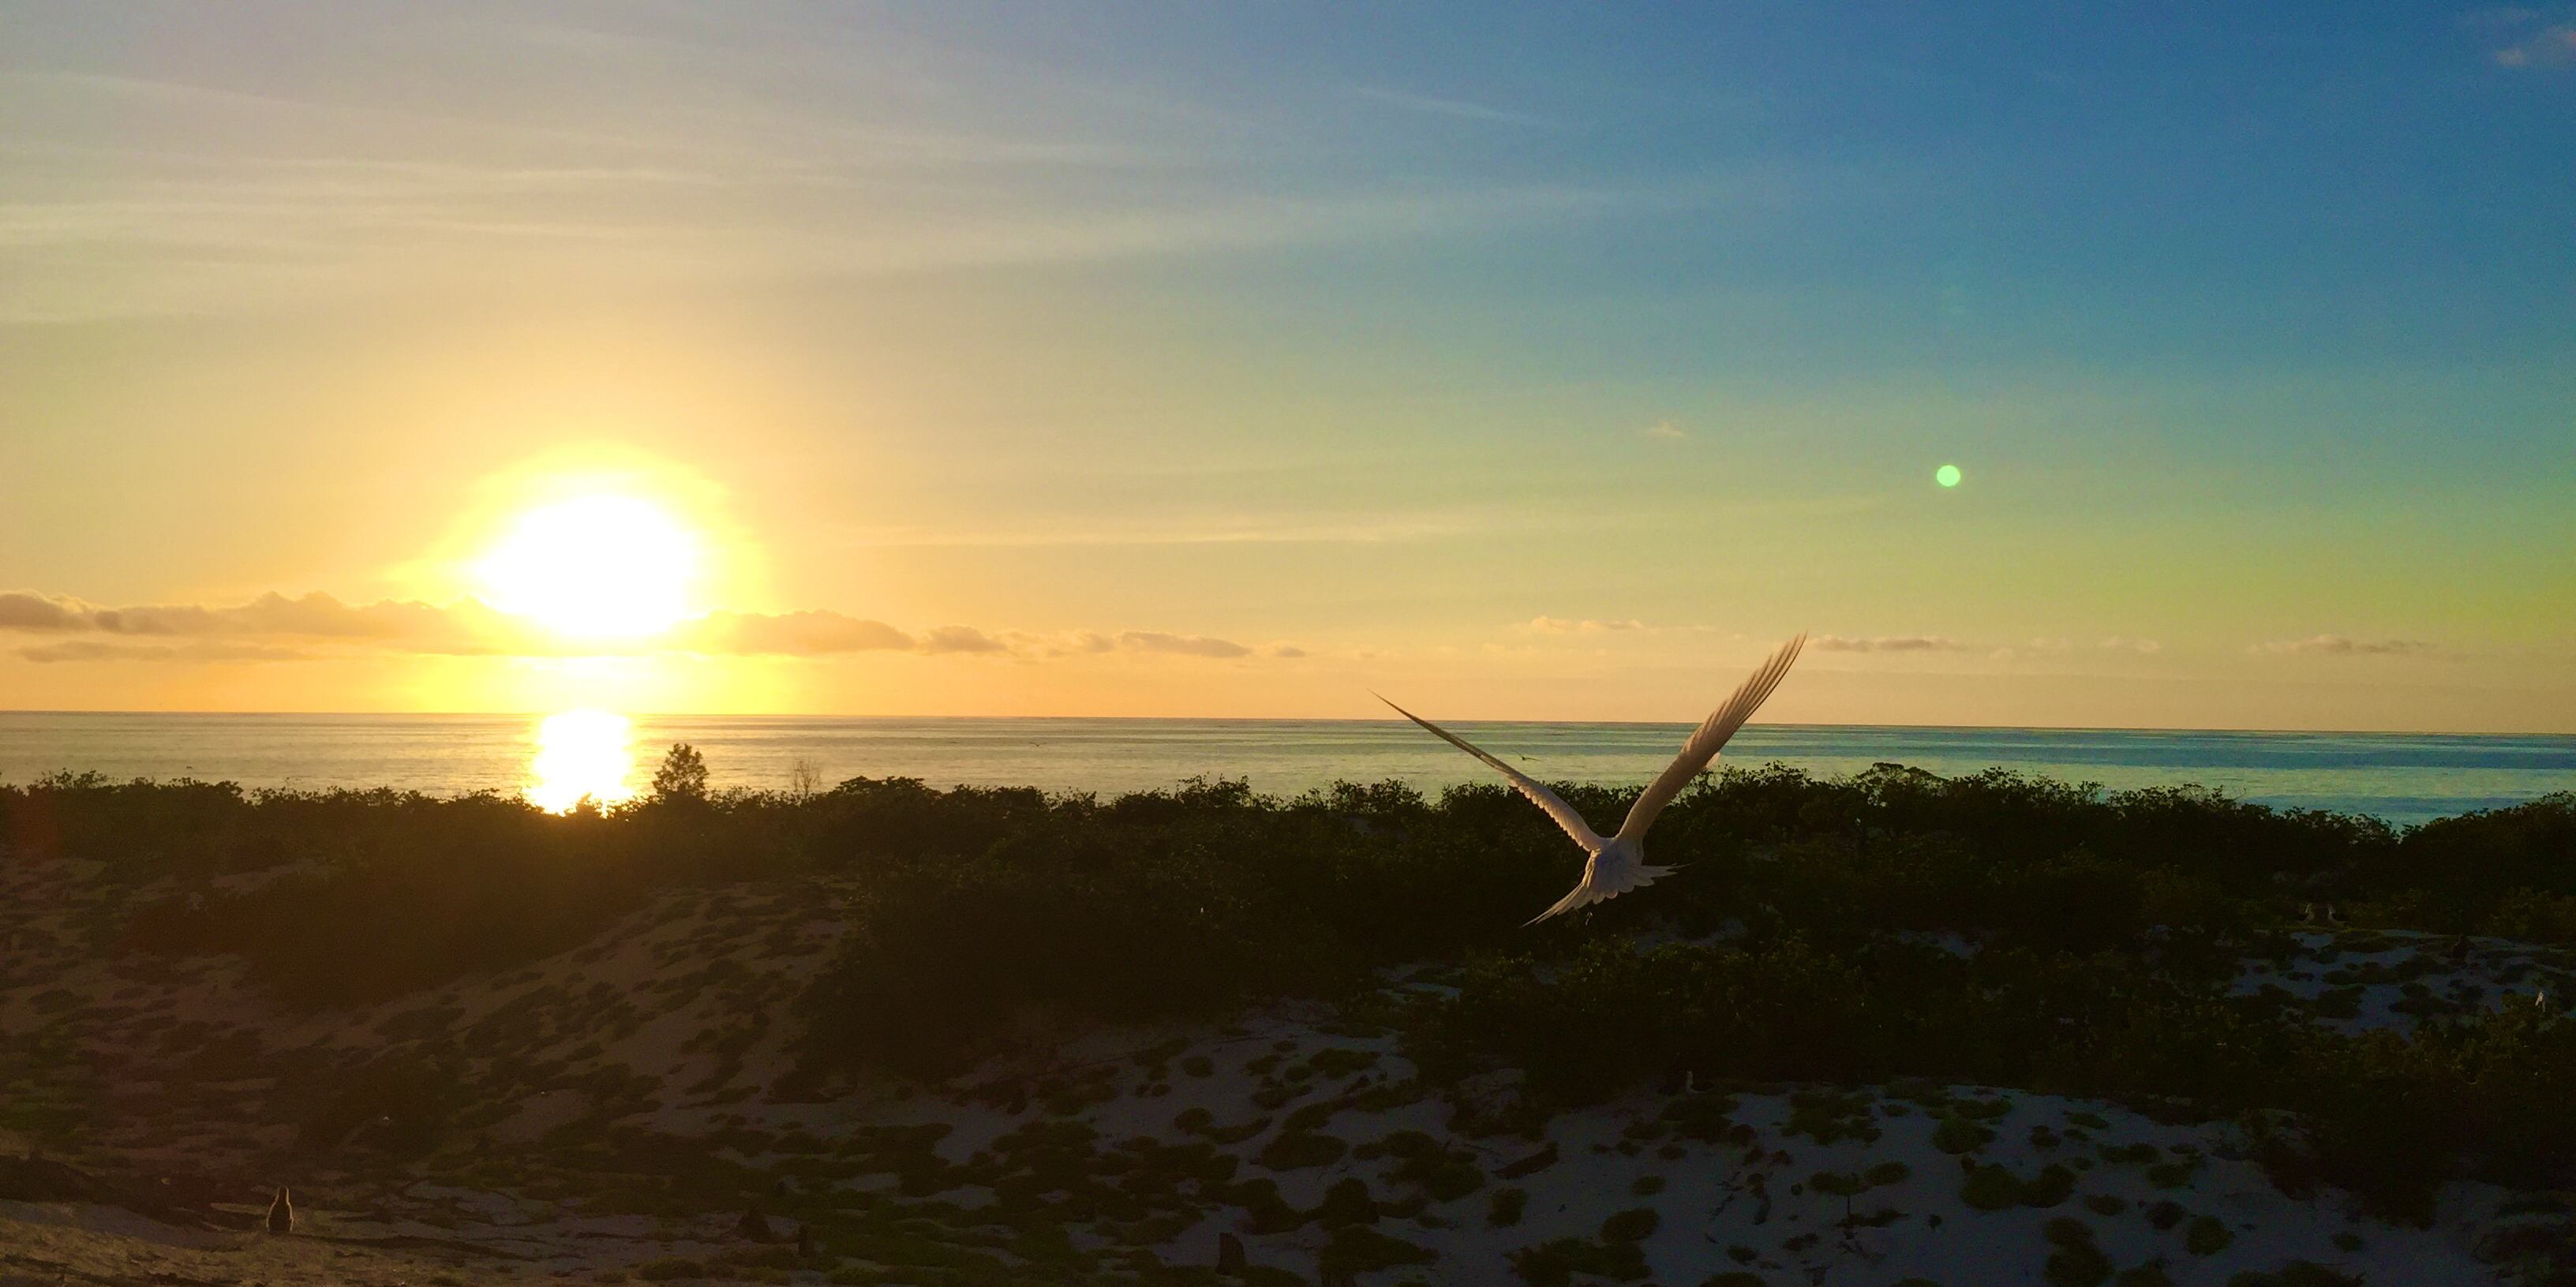 Sunset at Midway Atoll